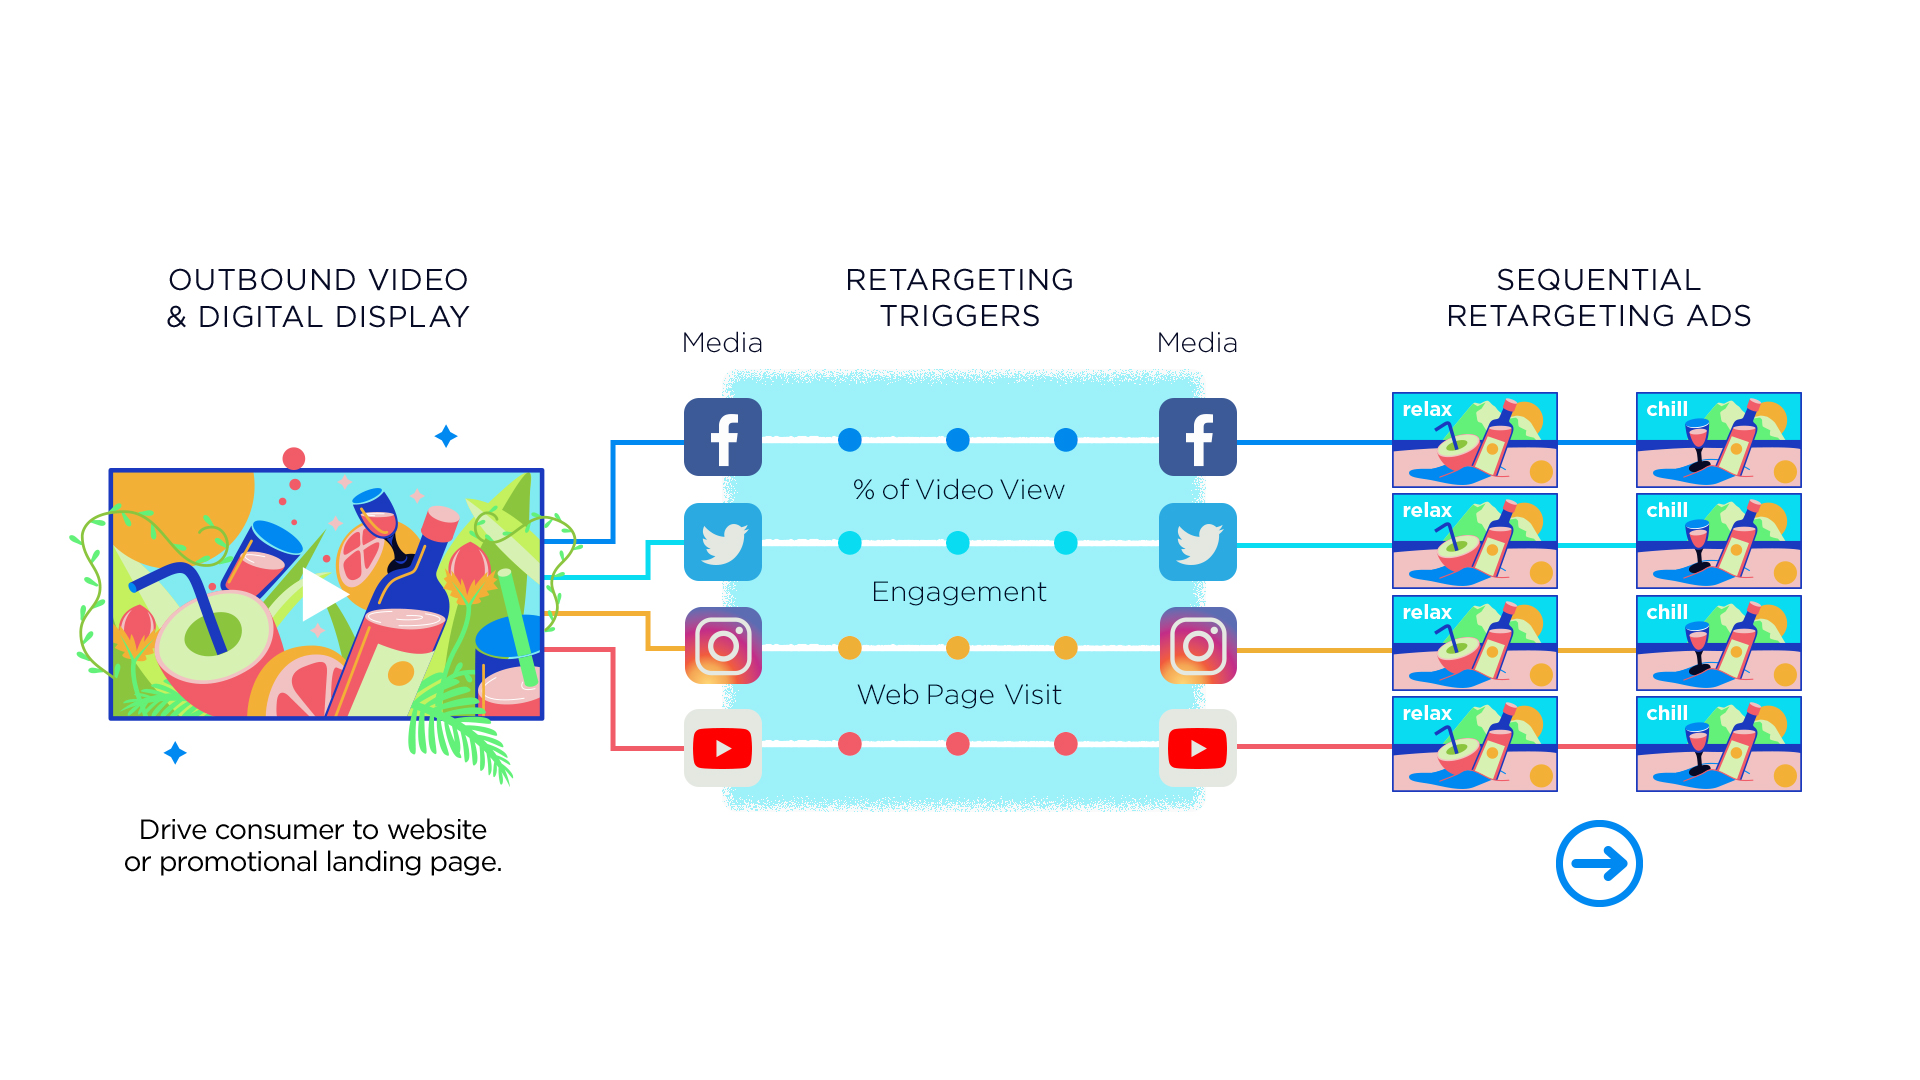 Outbound Video and Digital Display, Retargeting Triggers, Sequential Ads